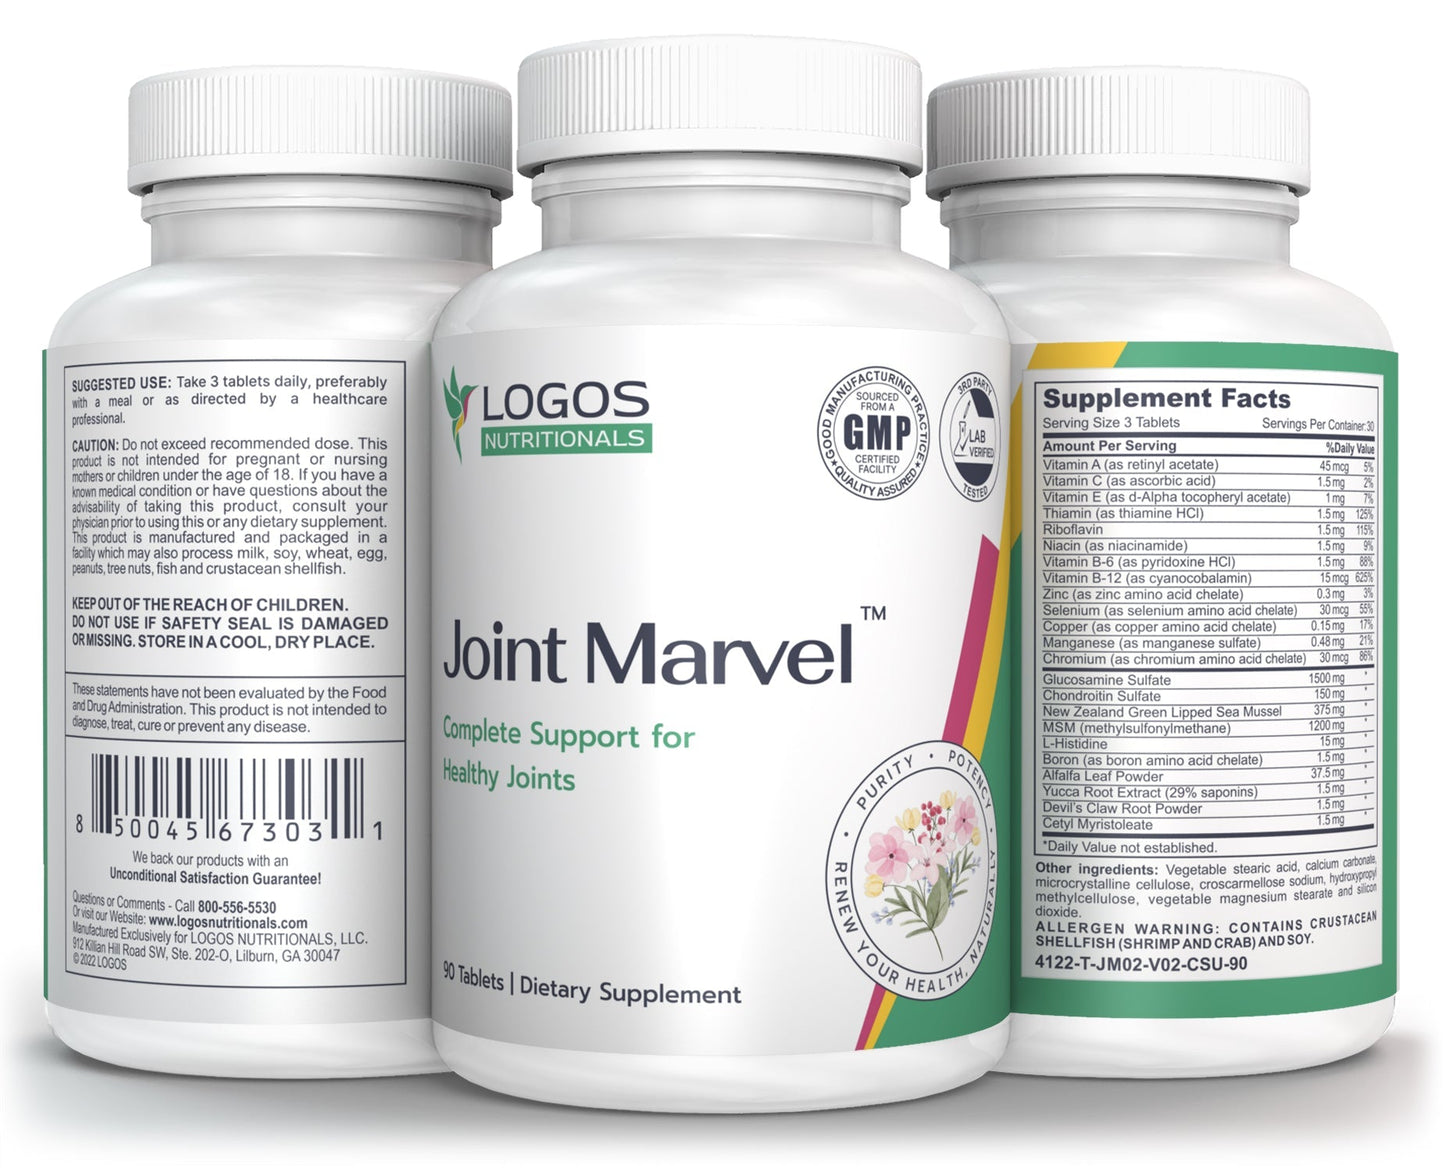 Logos Nutritionals_JOINT-MARVEL